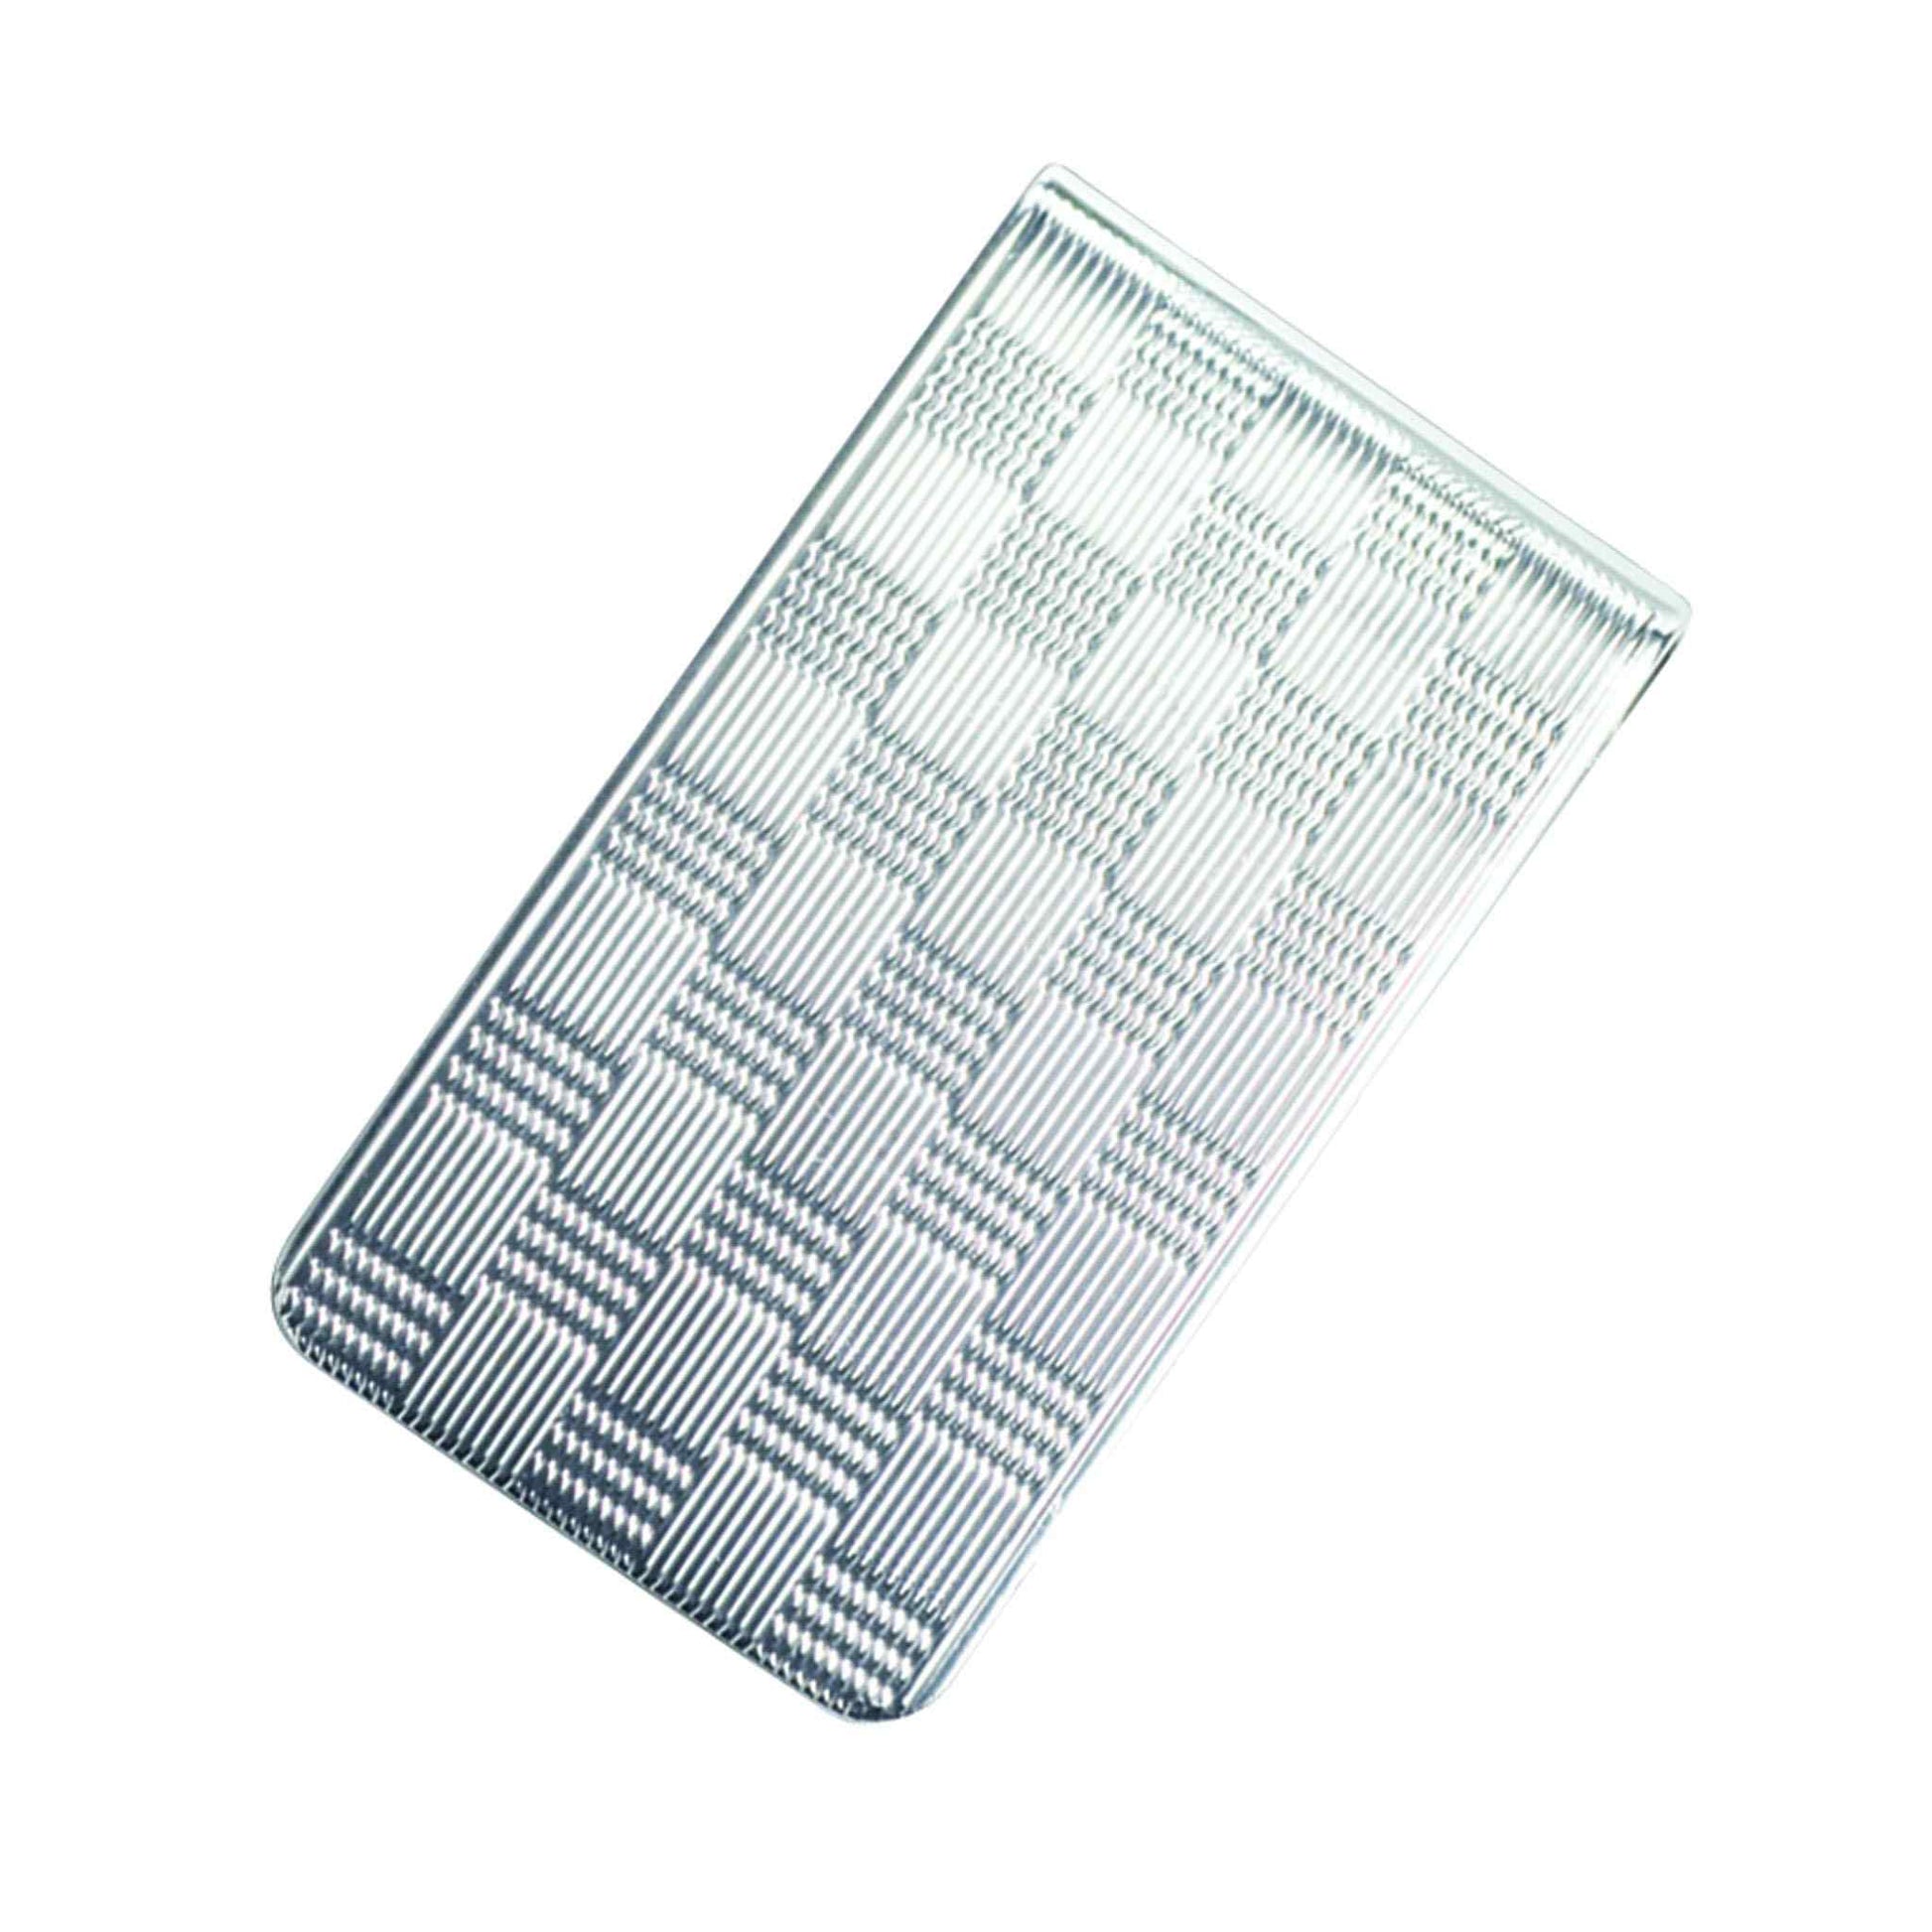 A 1" sterling silver money clip basket weave displayed on a neutral white background.